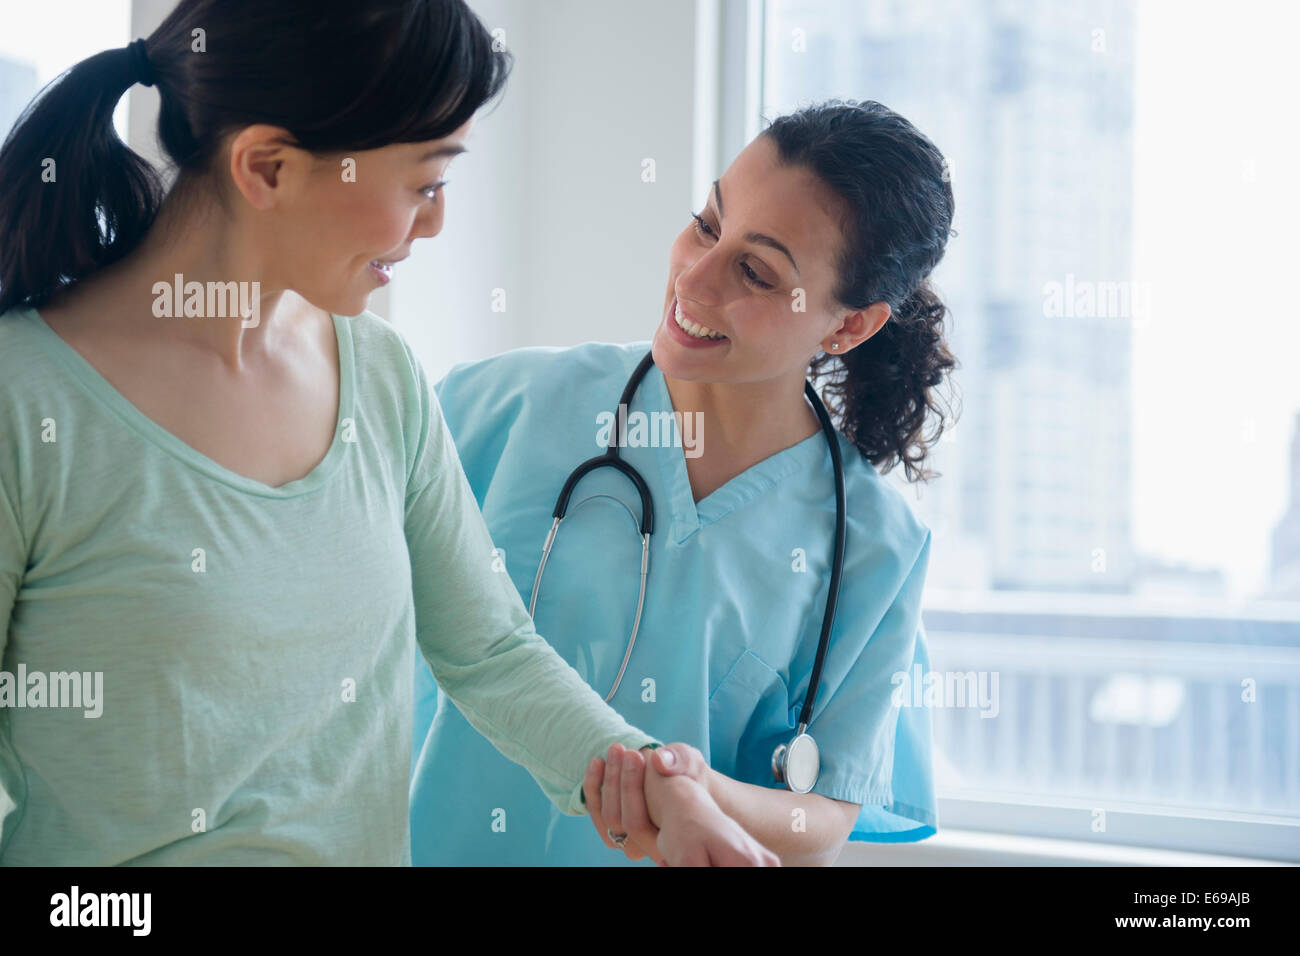 Nurse helping patient in hospital Banque D'Images